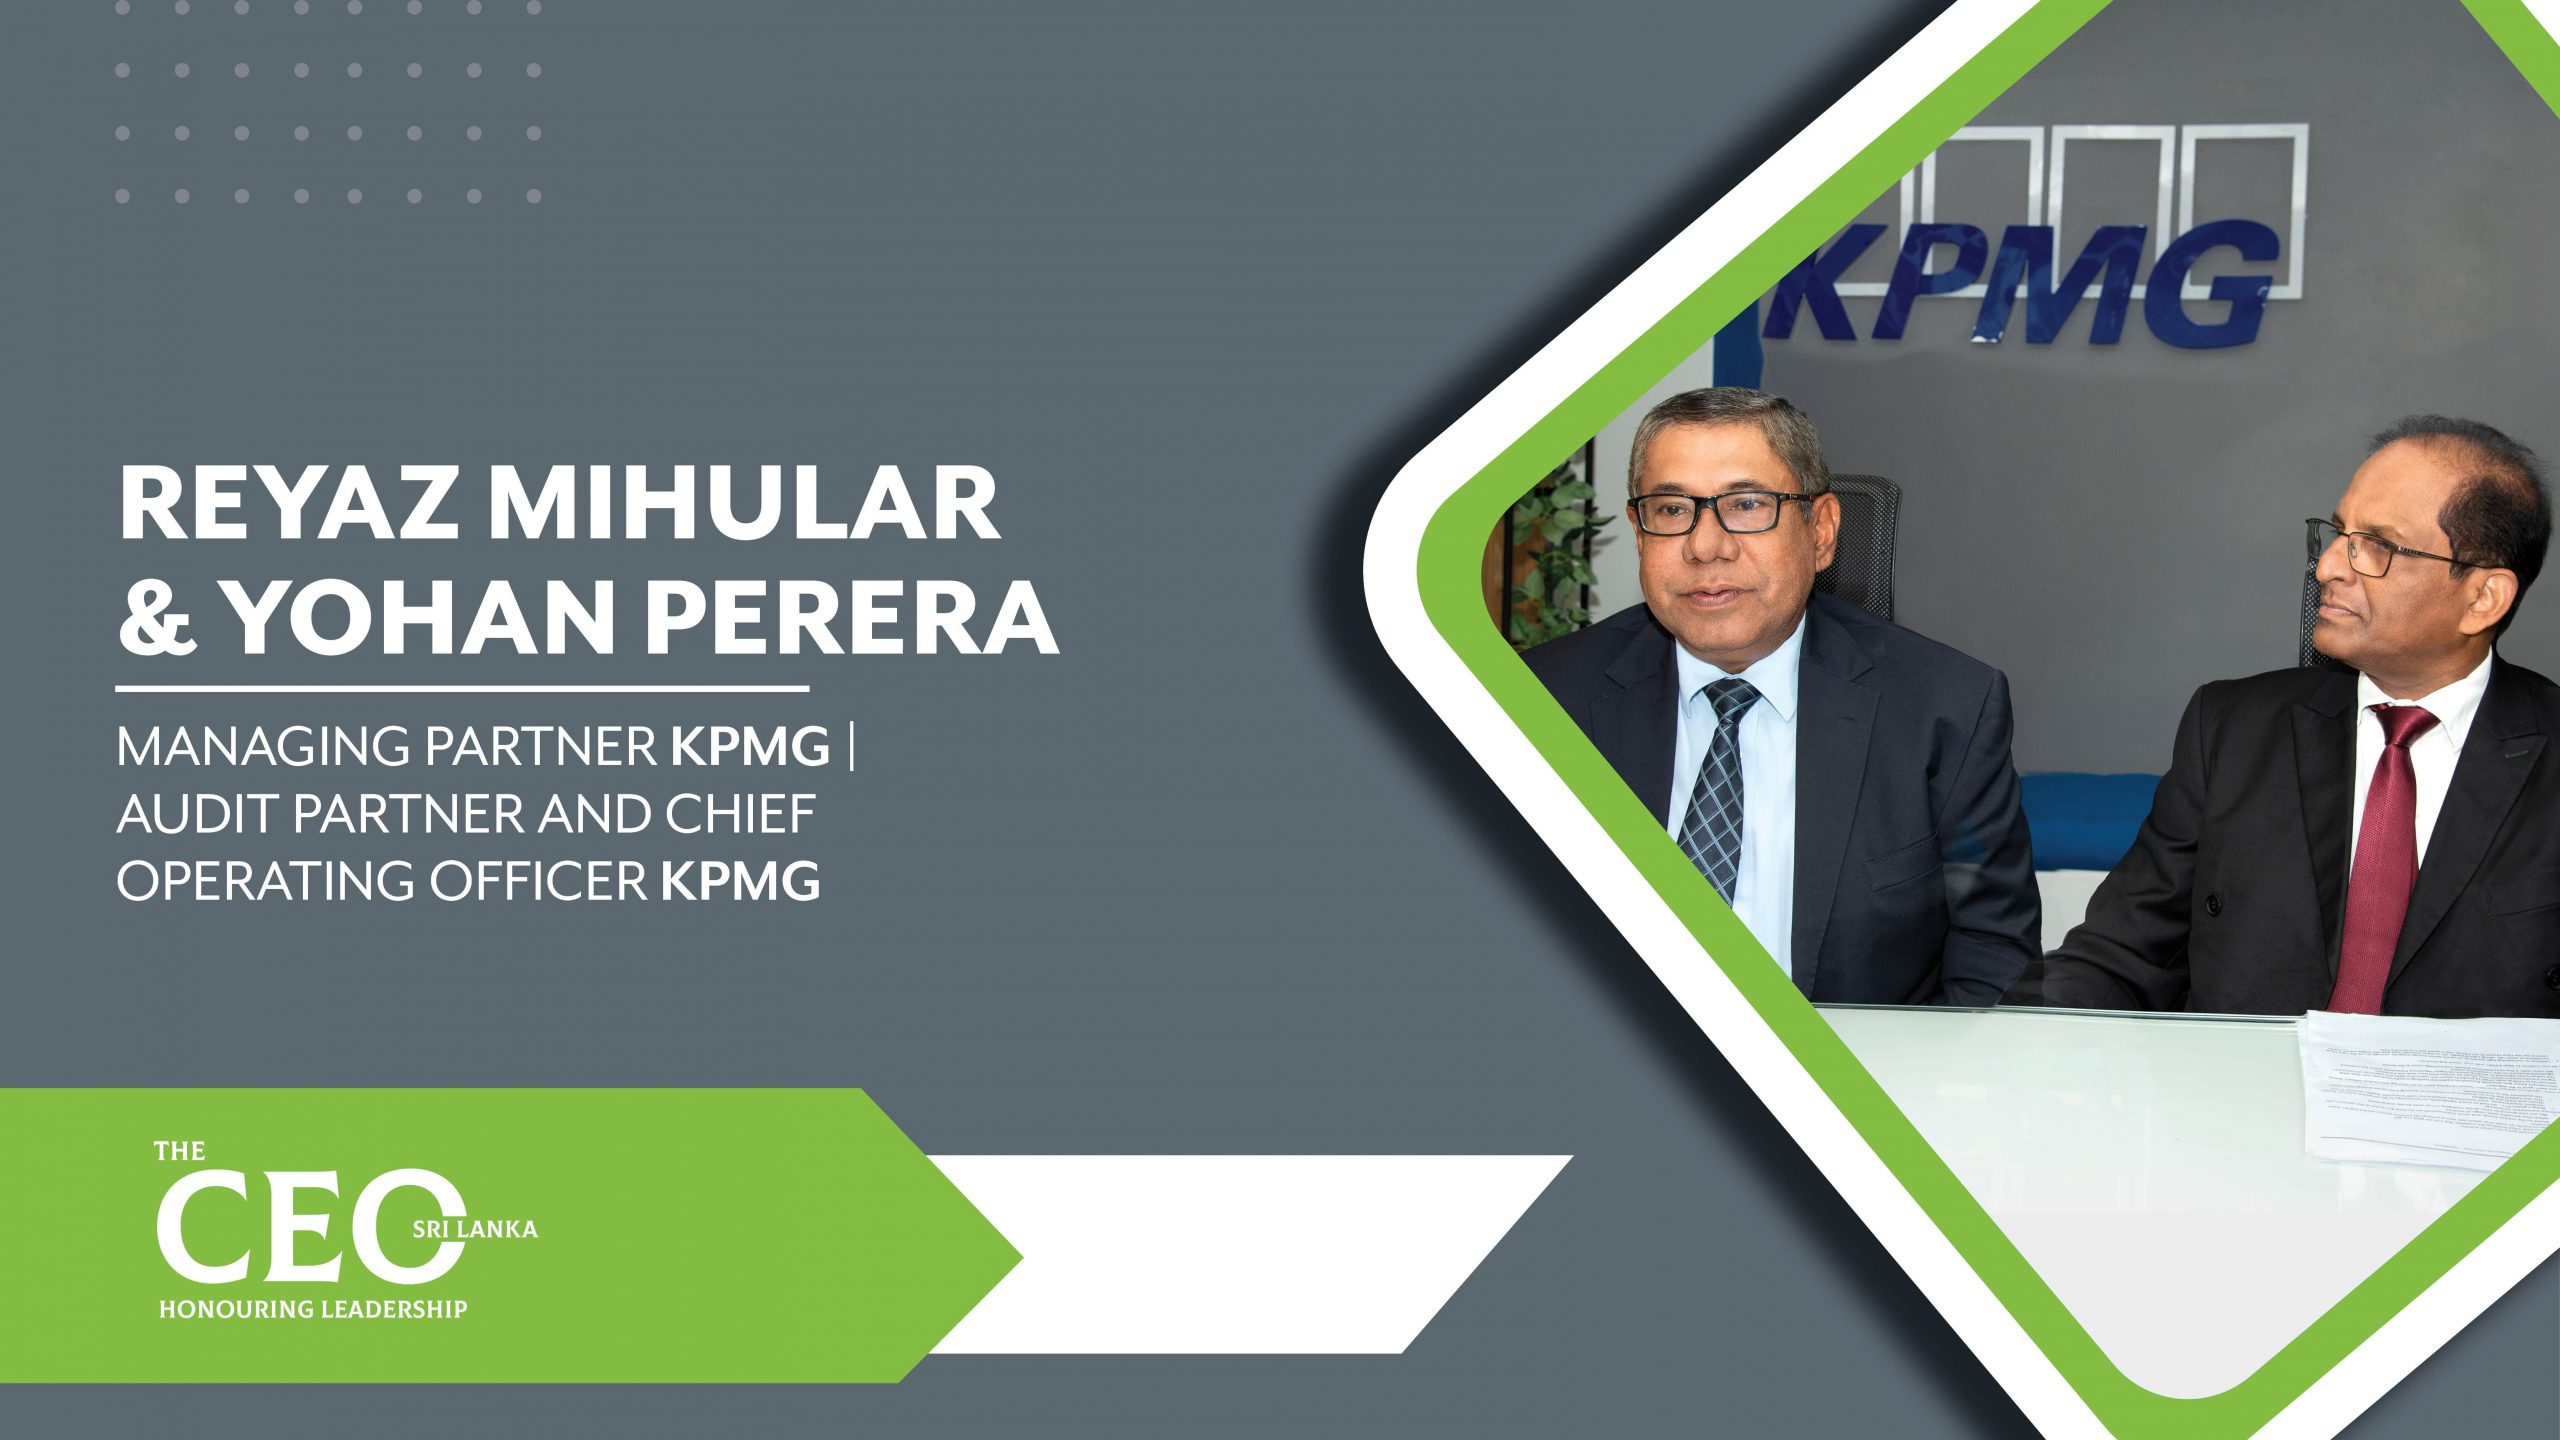 Focusing on Continuing to be a Trusted and Trustworthy Firm – Reyaz Mihular, the Managing Partner, and Yohan Perera, the Audit Partner / Chief Operating Officer of KPMG